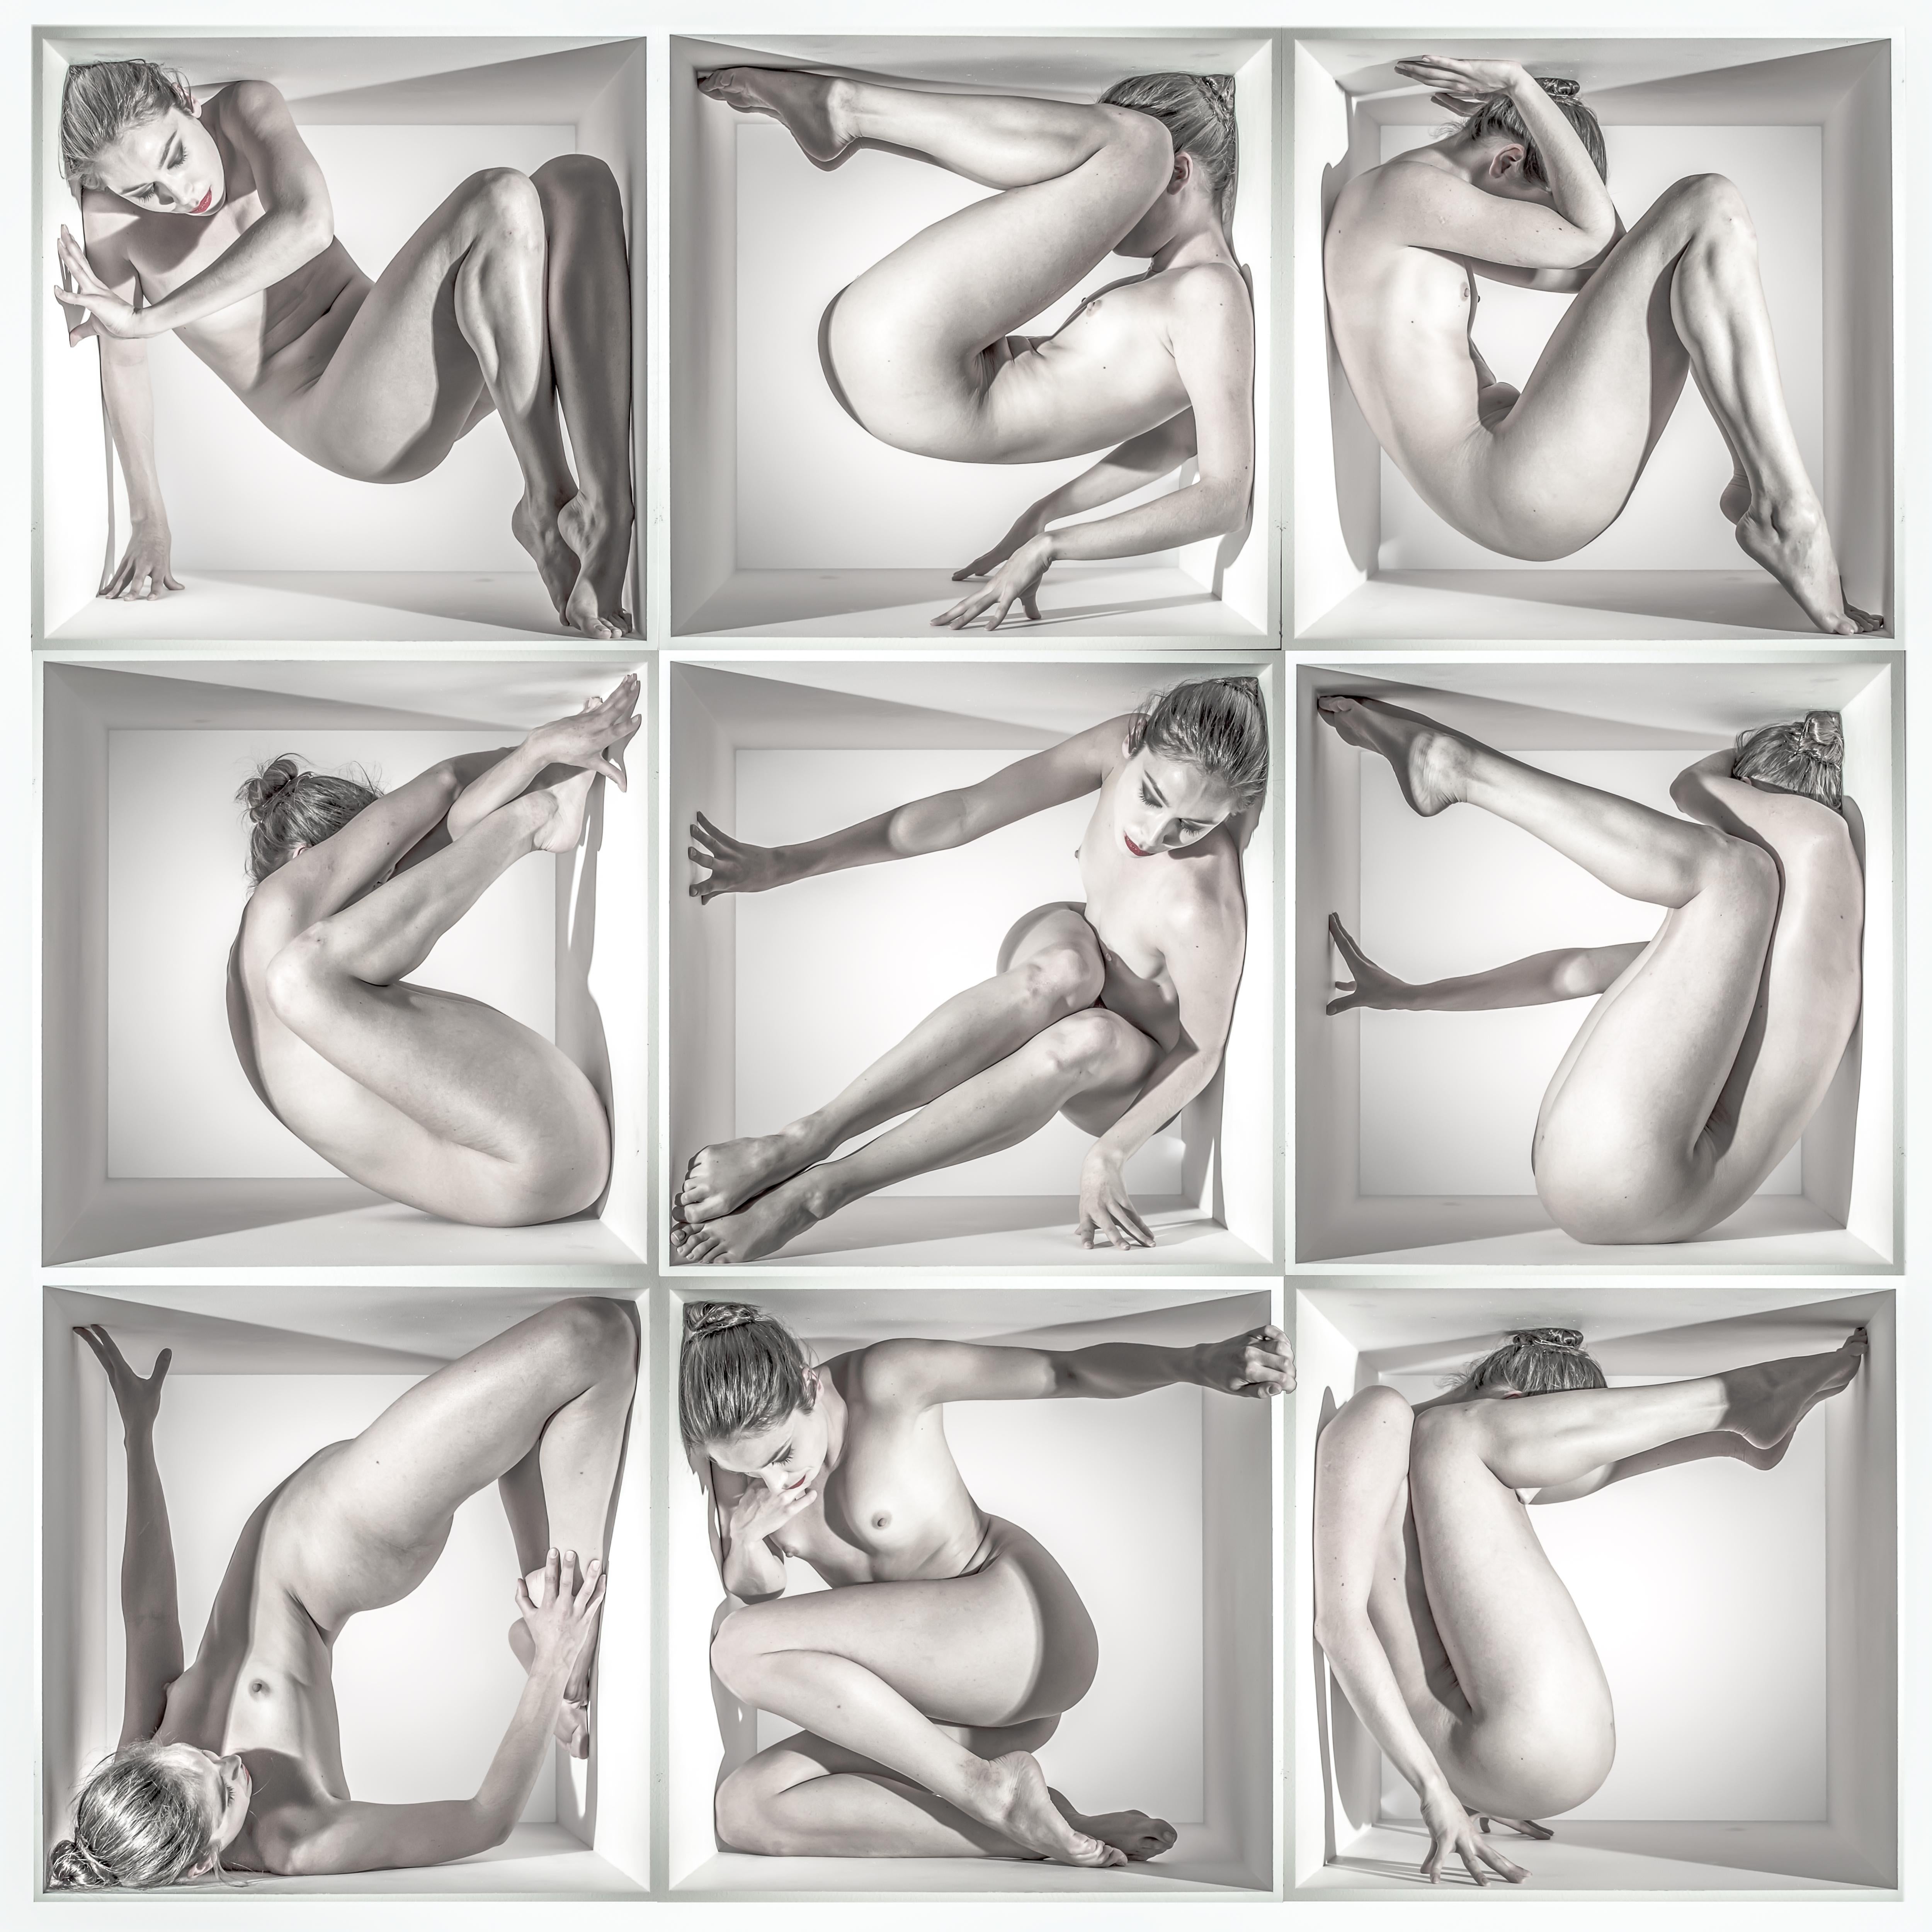 "UC 16" 3-D Lenticular Black & white figurative nude photo framed, Contemporary